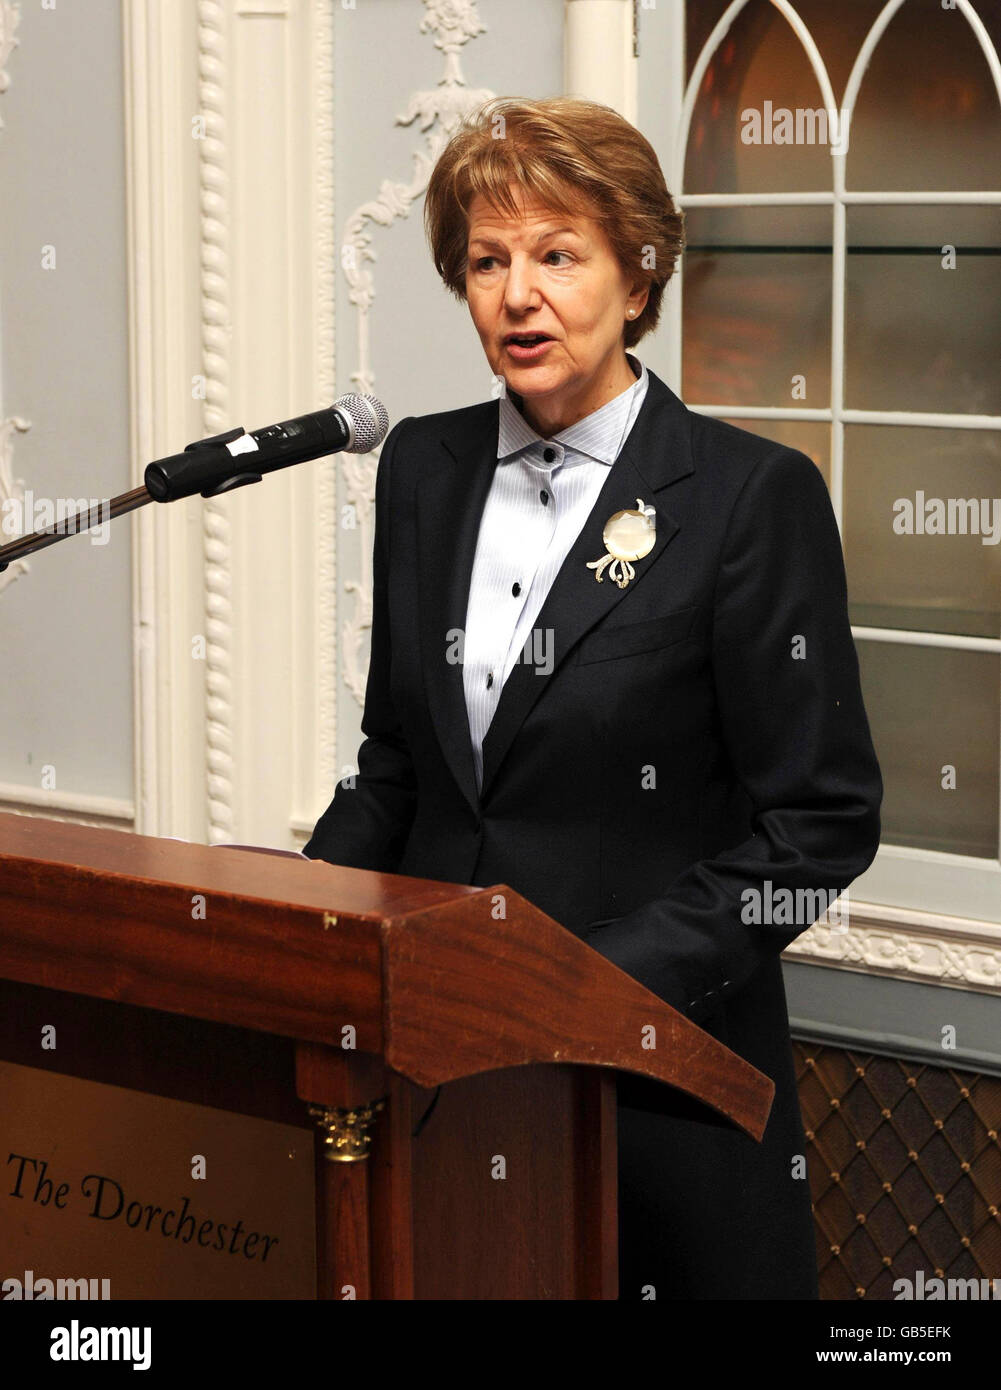 Baroness Nicholson of Winterbourne at the AMAR International Charitable Foundation Armani Charity Show in aid of child orphans in Iraq, at the Dorchester Hotel, Park Lane, central London. Stock Photo